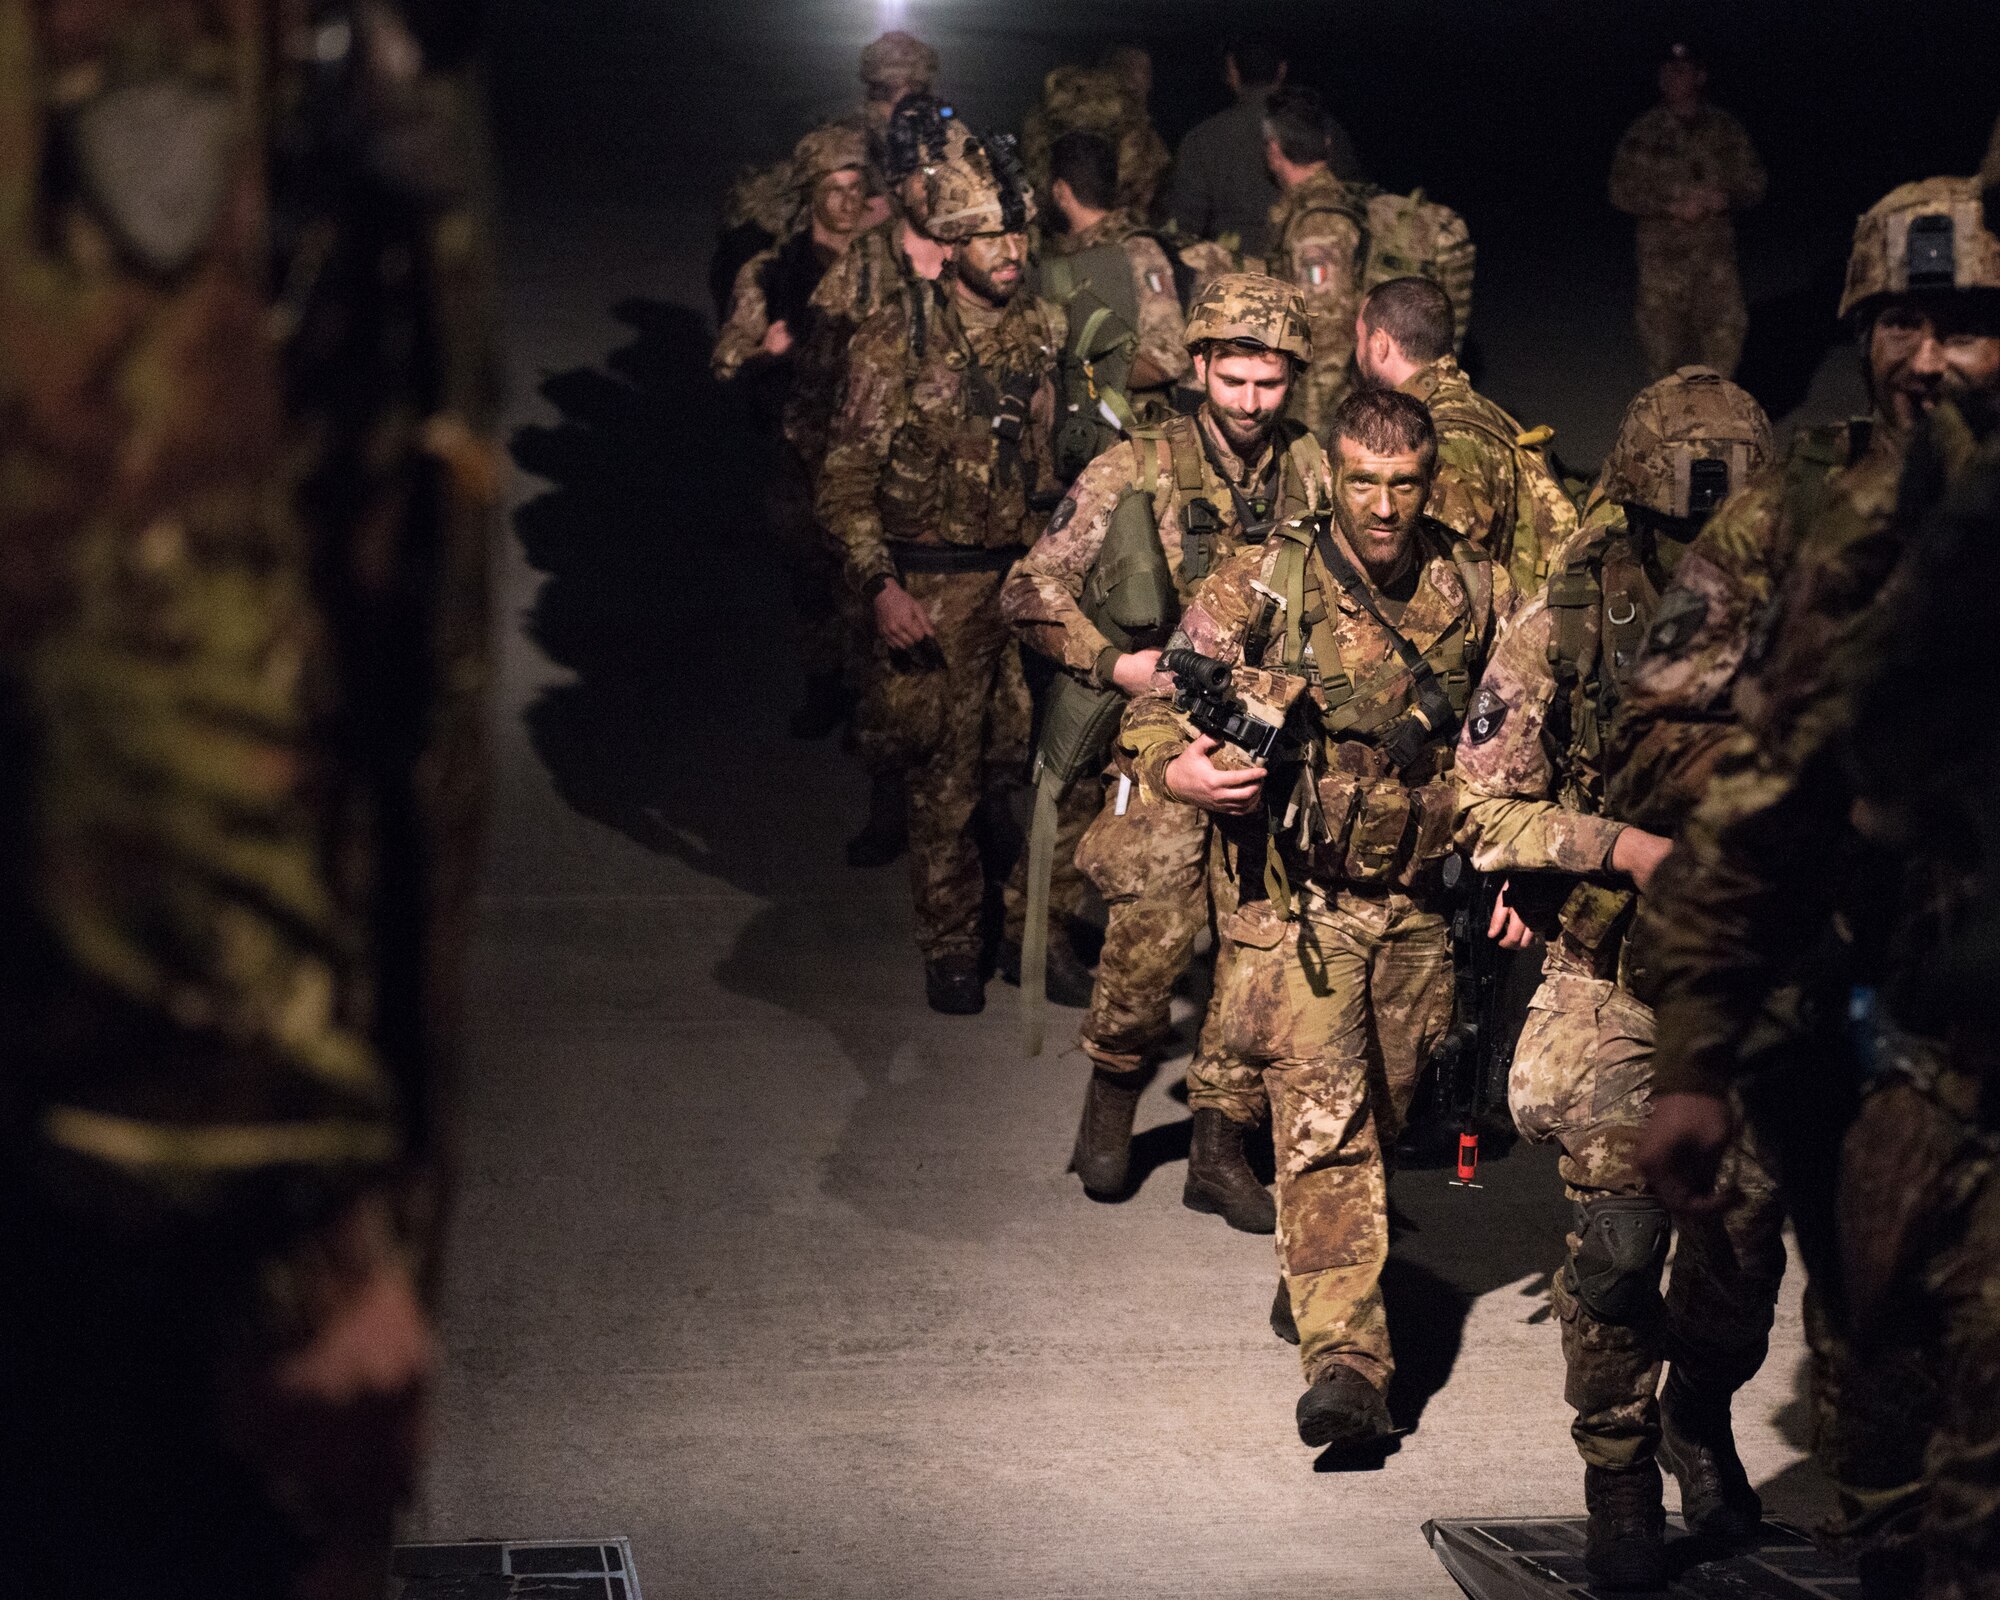 Members of the Italian Folgore, an airborne paratrooper brigade from the Italian Army, return from executing an air drop mission with members of the Kentucky Air National Guard’s 123rd Airlift Wing in Pisa, Italy, on Nov. 7, 2019. The mission was part of Mangusta 19, a bi-lateral exercise designed to promote readiness and interoperability among NATO allies. (U.S. Air National Guard photo by Senior Airman Chloe Ochs)